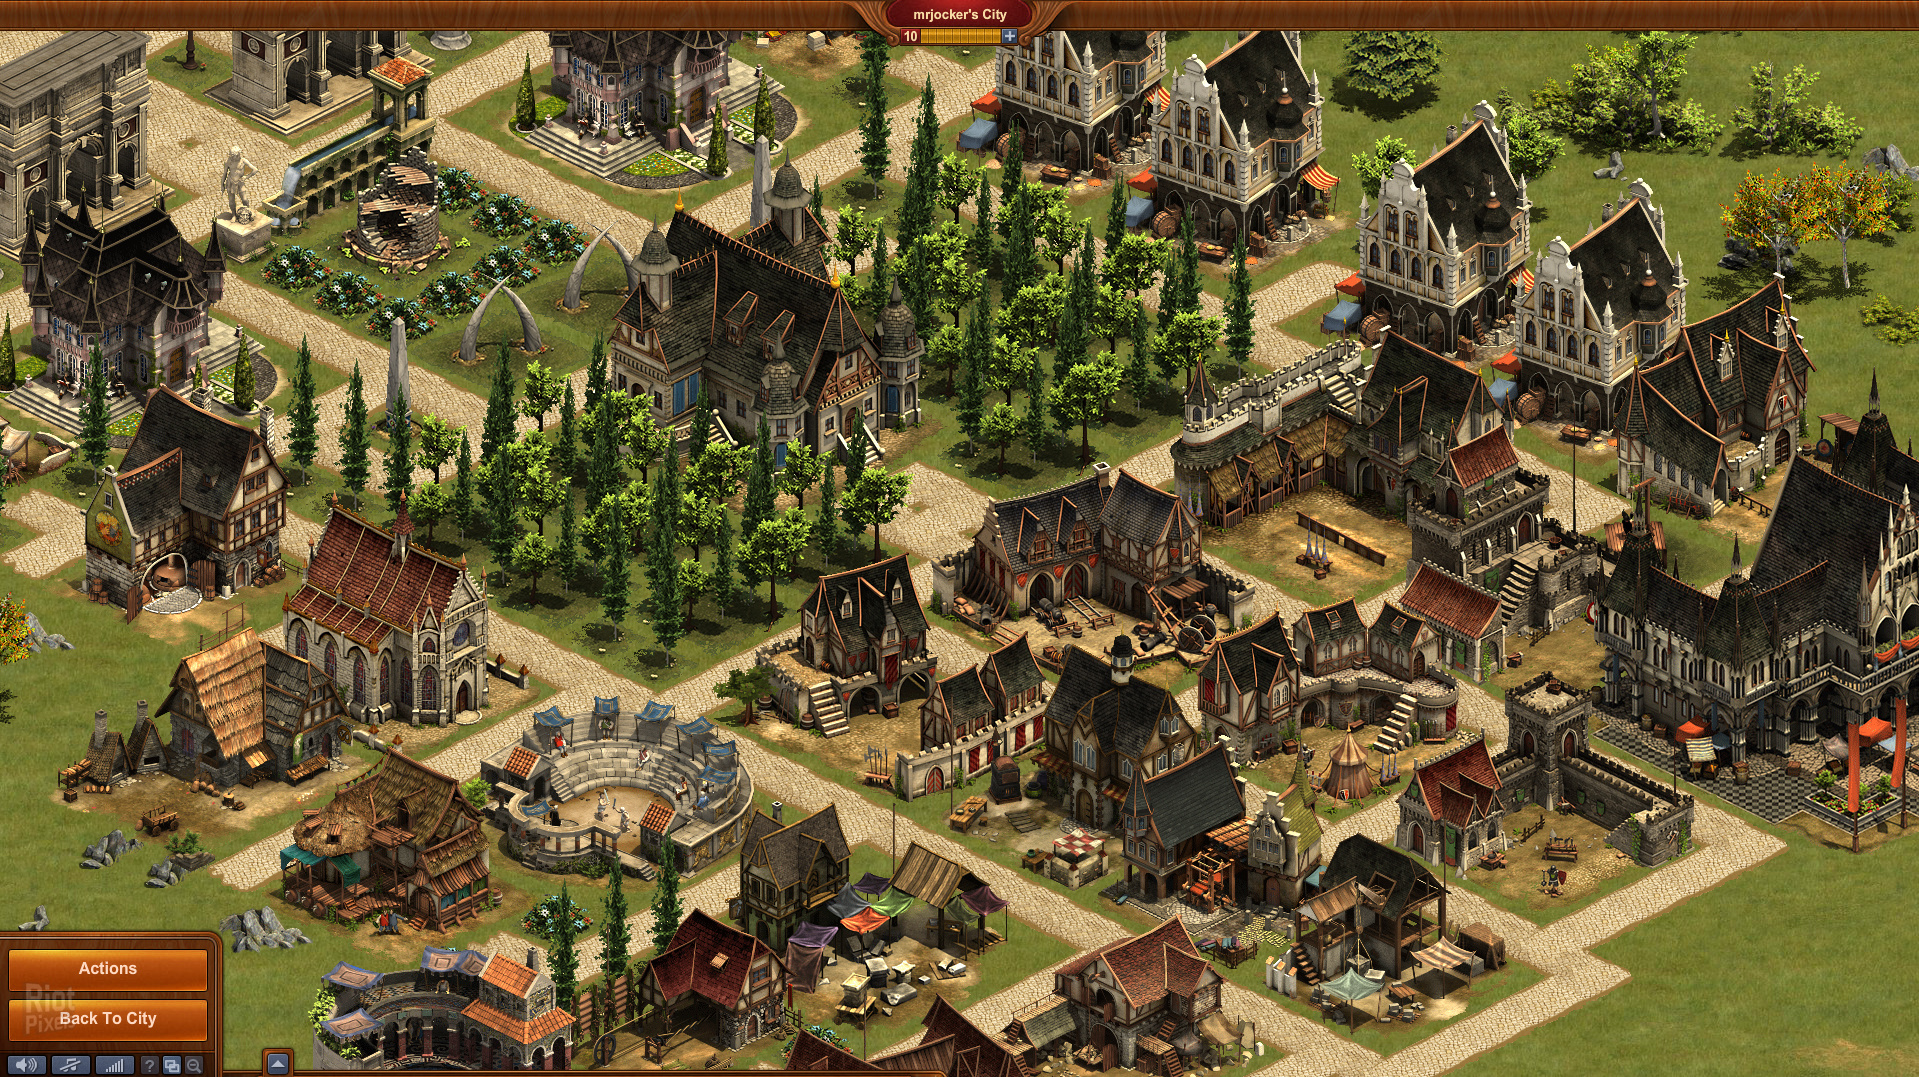 forge of empires best army industrial age